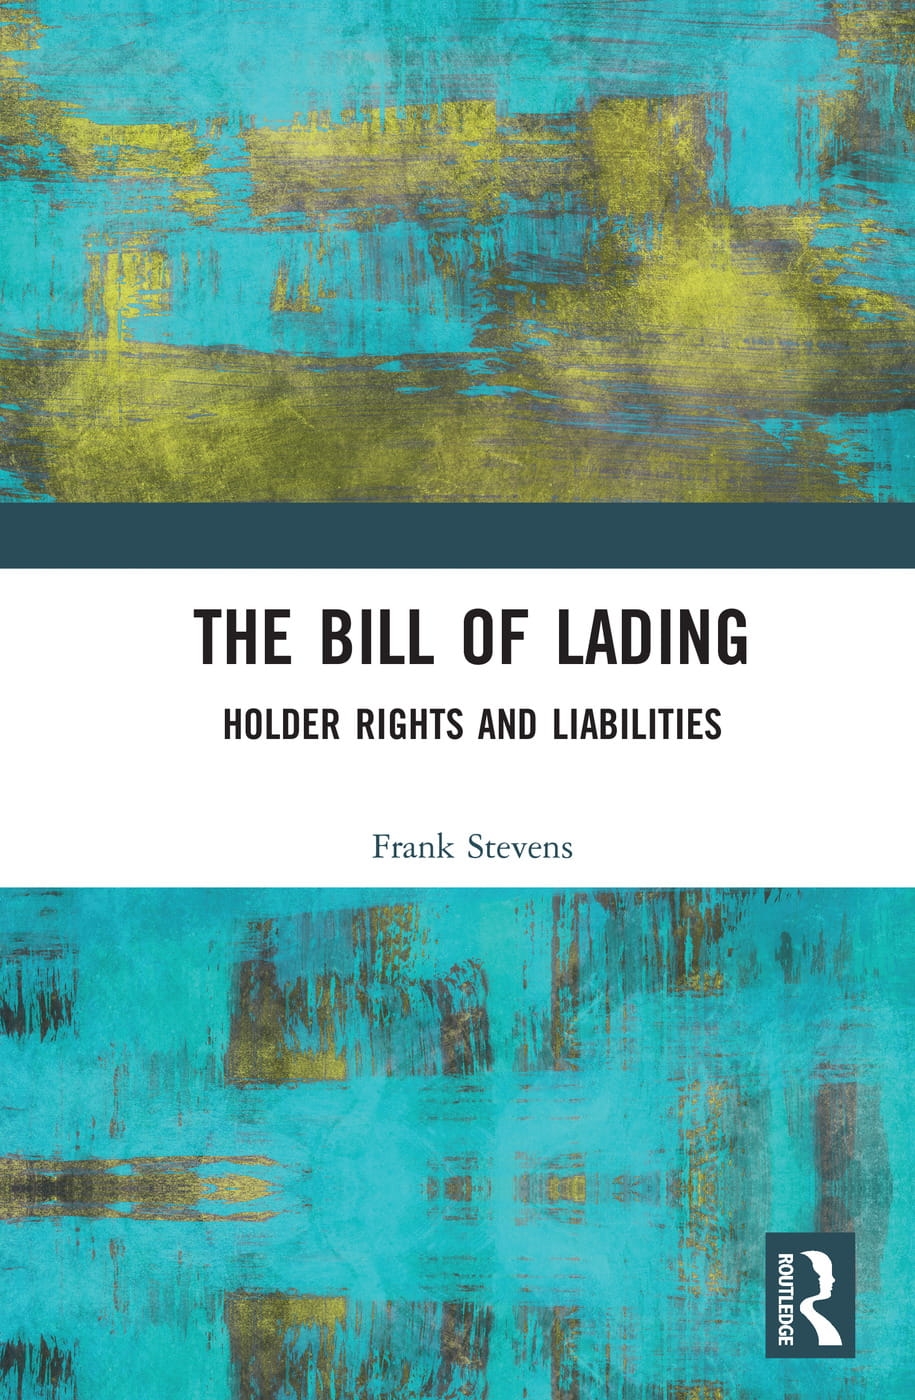 The Bill of Lading: Holder Rights and Liabilities